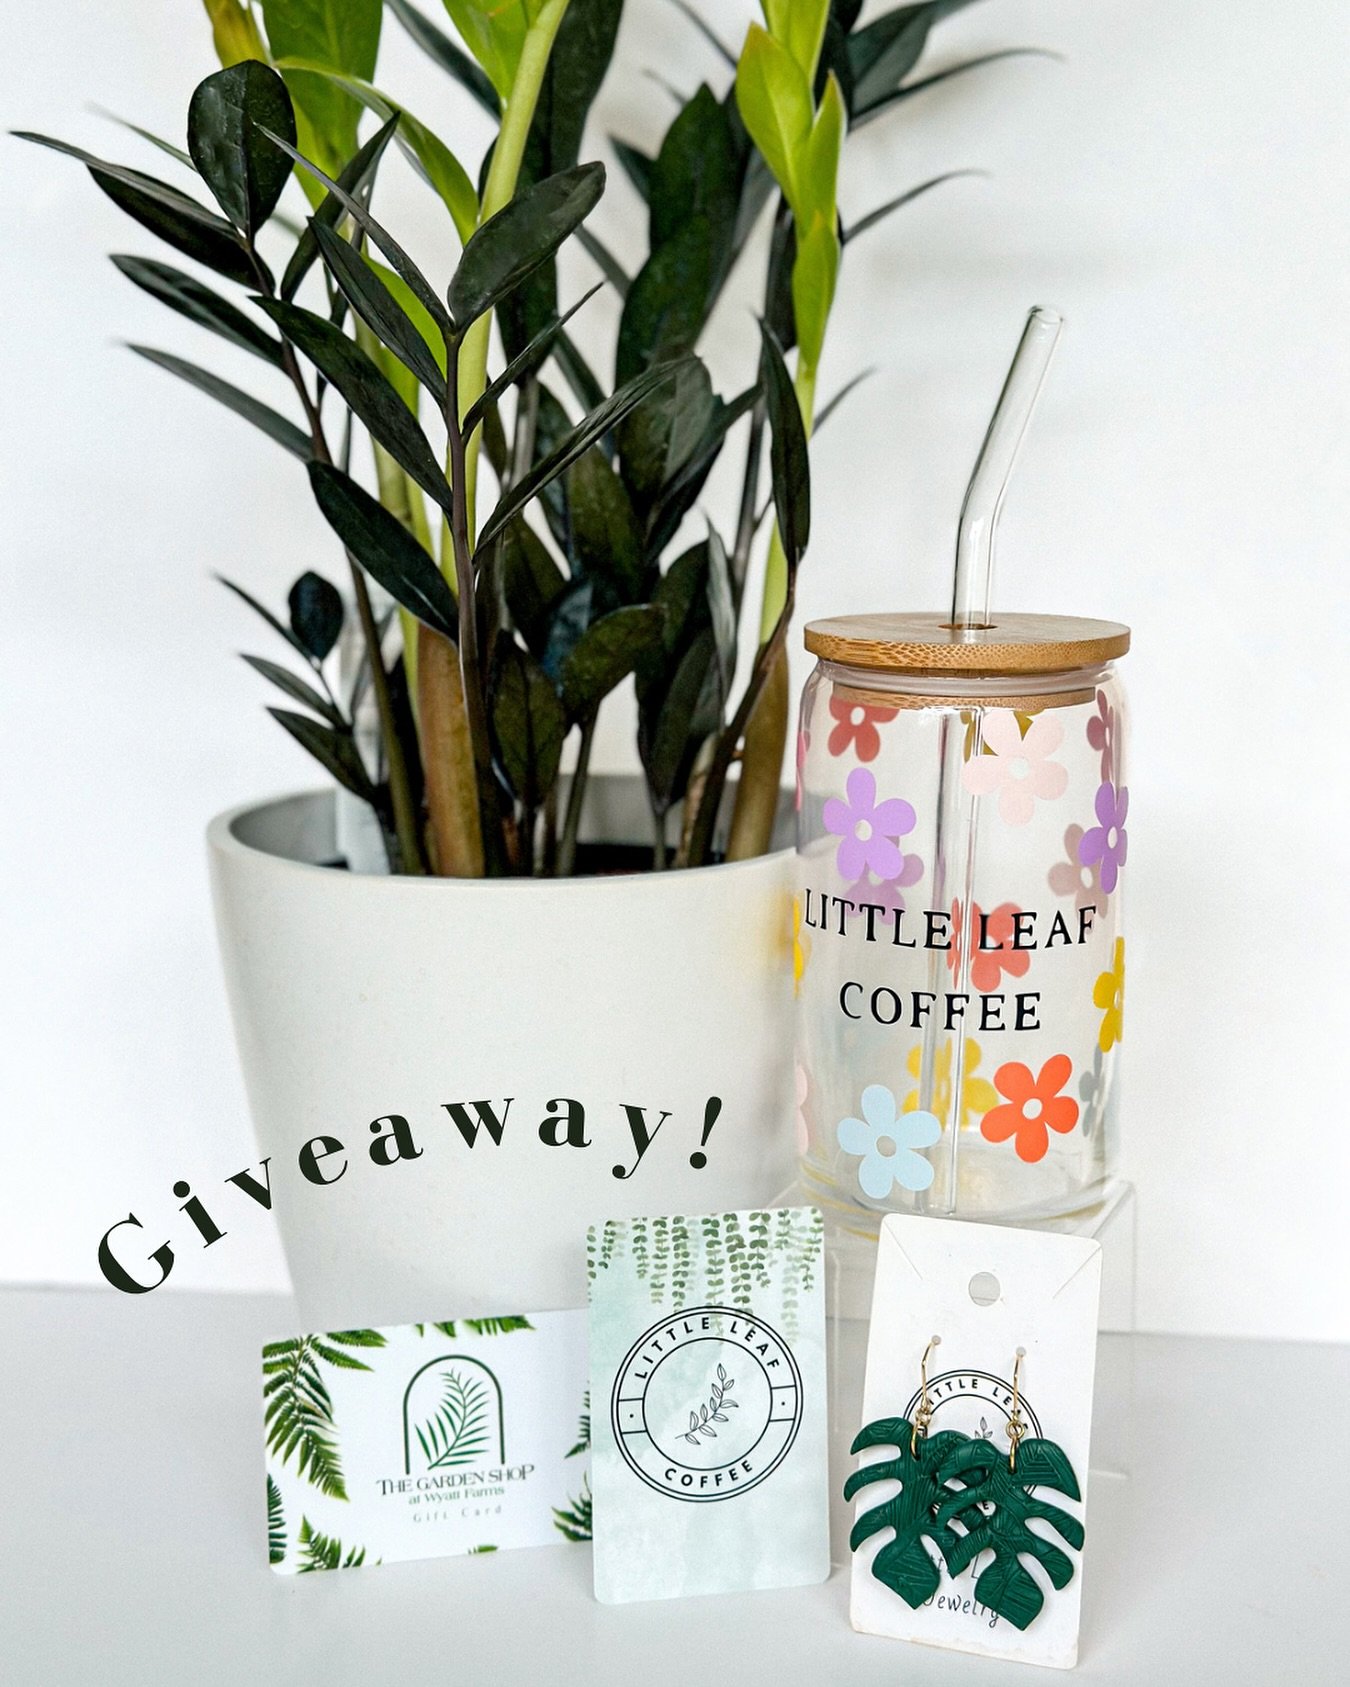 IT&rsquo;S GIVEAWAY TIME‼️😆🌿
We are partnering with @littleleaf_coffee for a fun giveaway! 👏🏼

Winner gets : 
&bull;$25 gift card from Little Leaf
&bull;$25 gift card from Wyatt Farms 
&bull;Little Leaf Drinking Glass and Monstera Earrings 
&bull